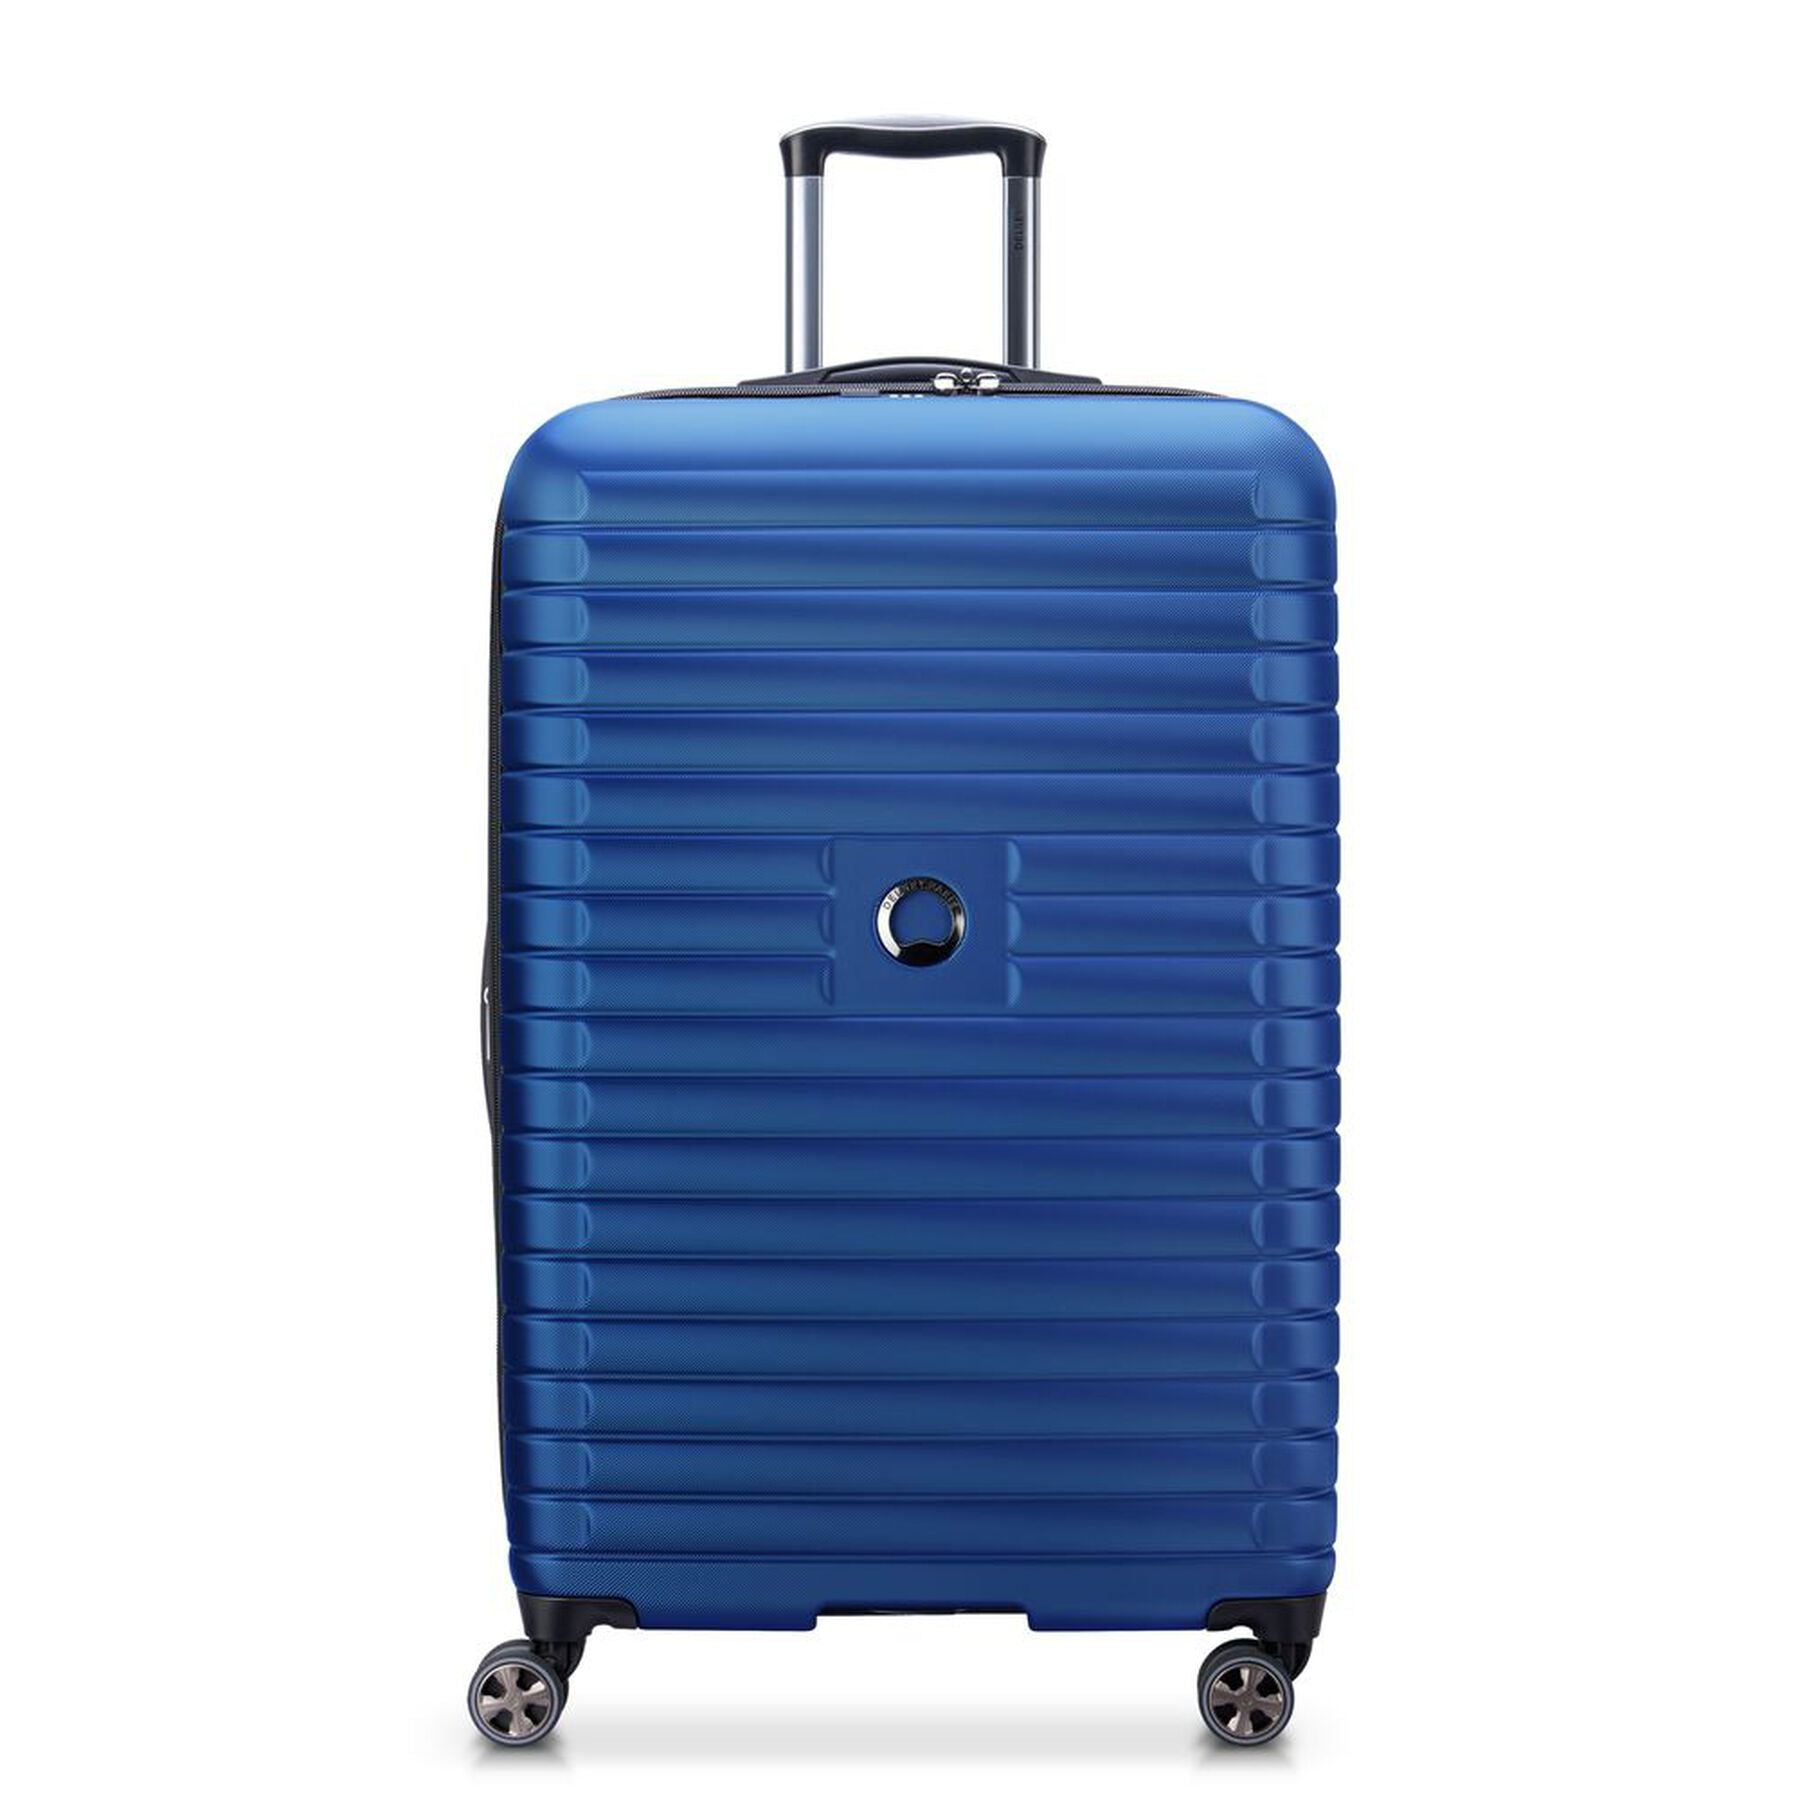 Delsey Cruise 3.0 28" Expandable Spinner Upright